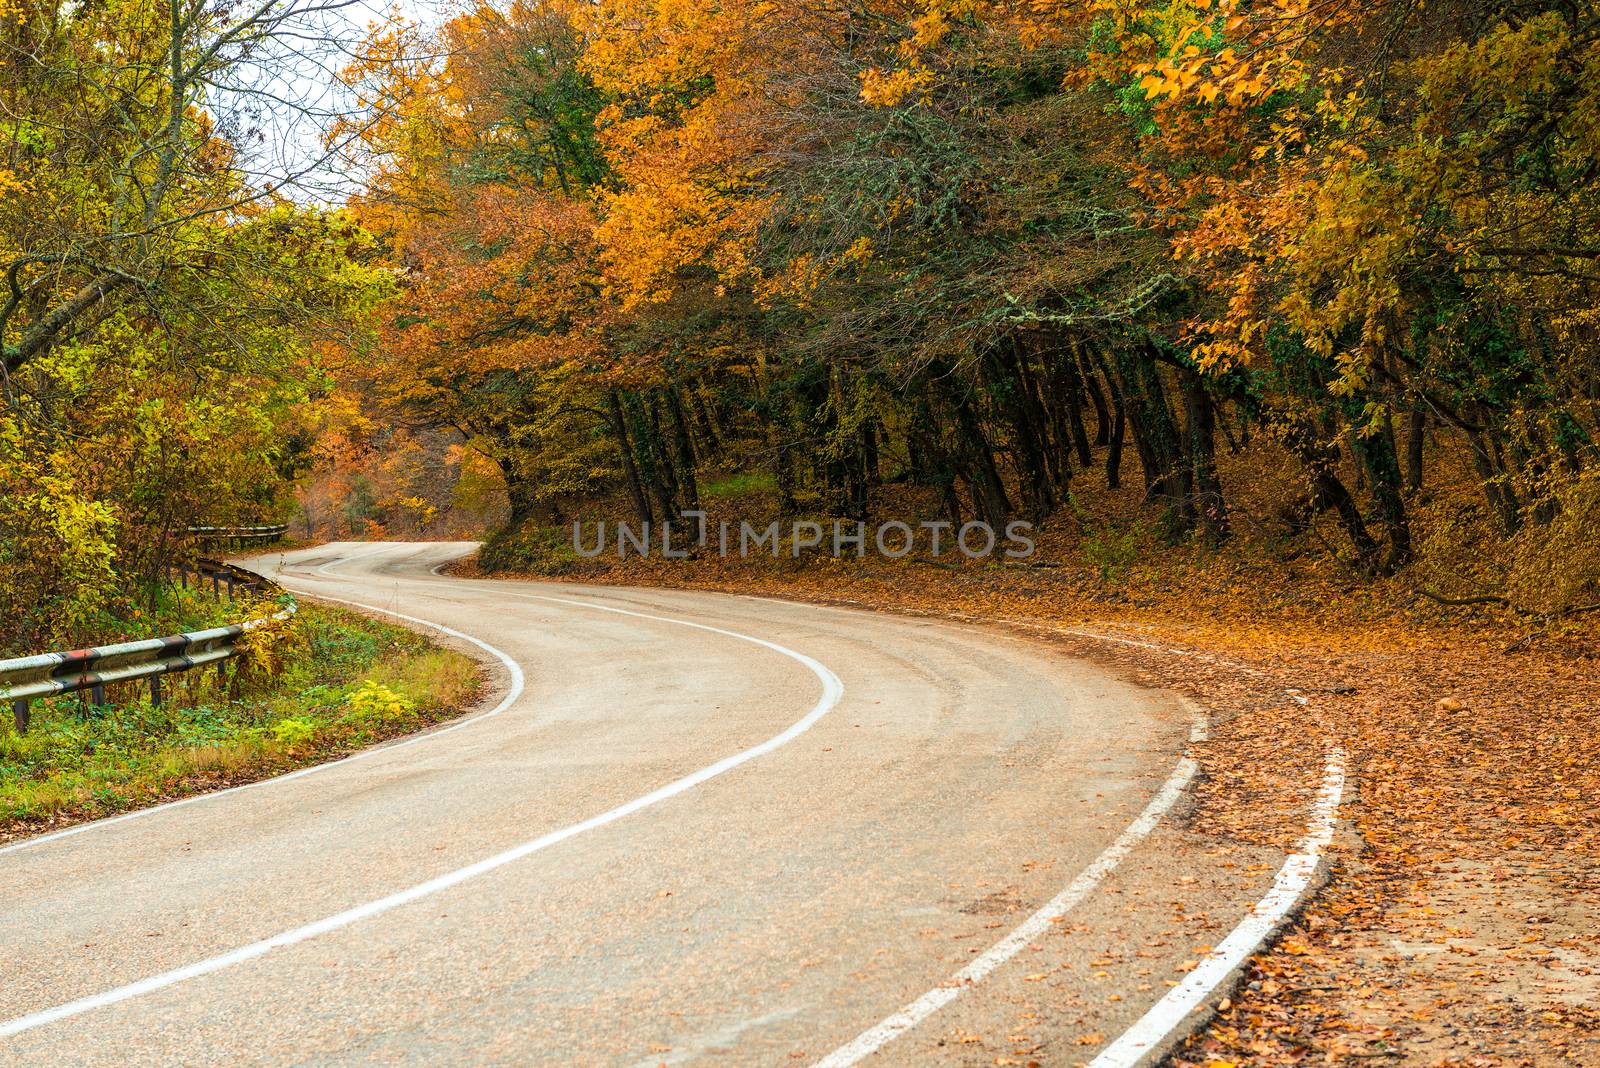 A curvy road in the mountains, beautiful autumn trees with yellow leaves